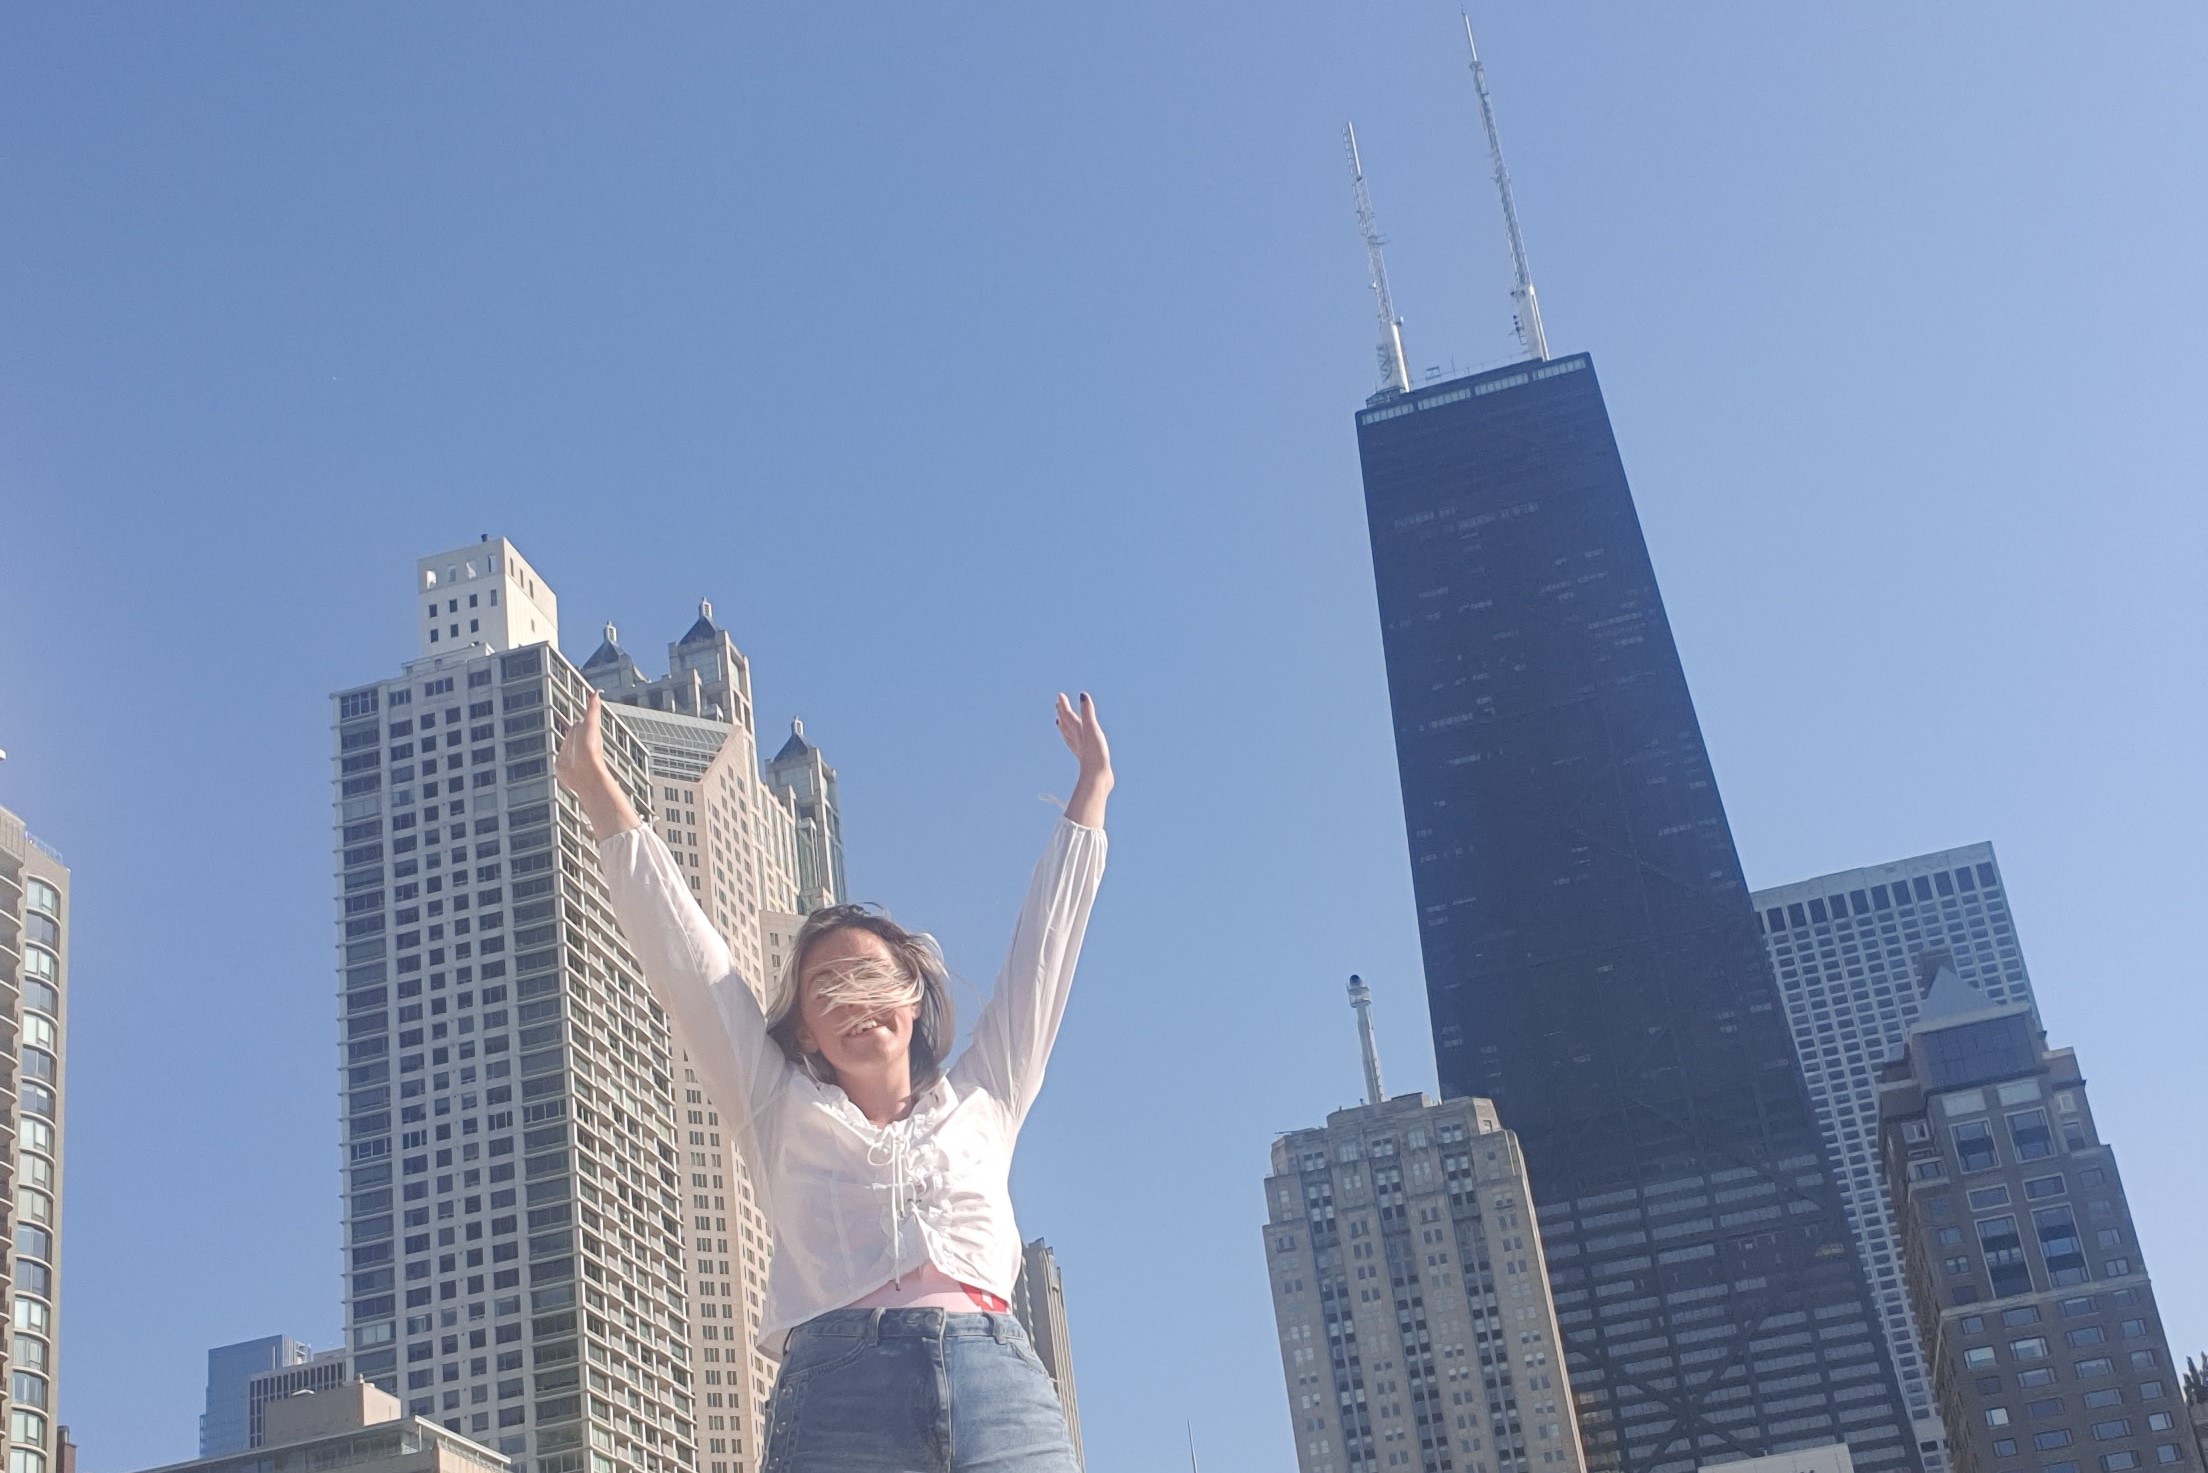 BA International student, Niamh Browne, arrives in the US to begin her study abroad period at Columbia College in Chicago under the MAUI exchange. 